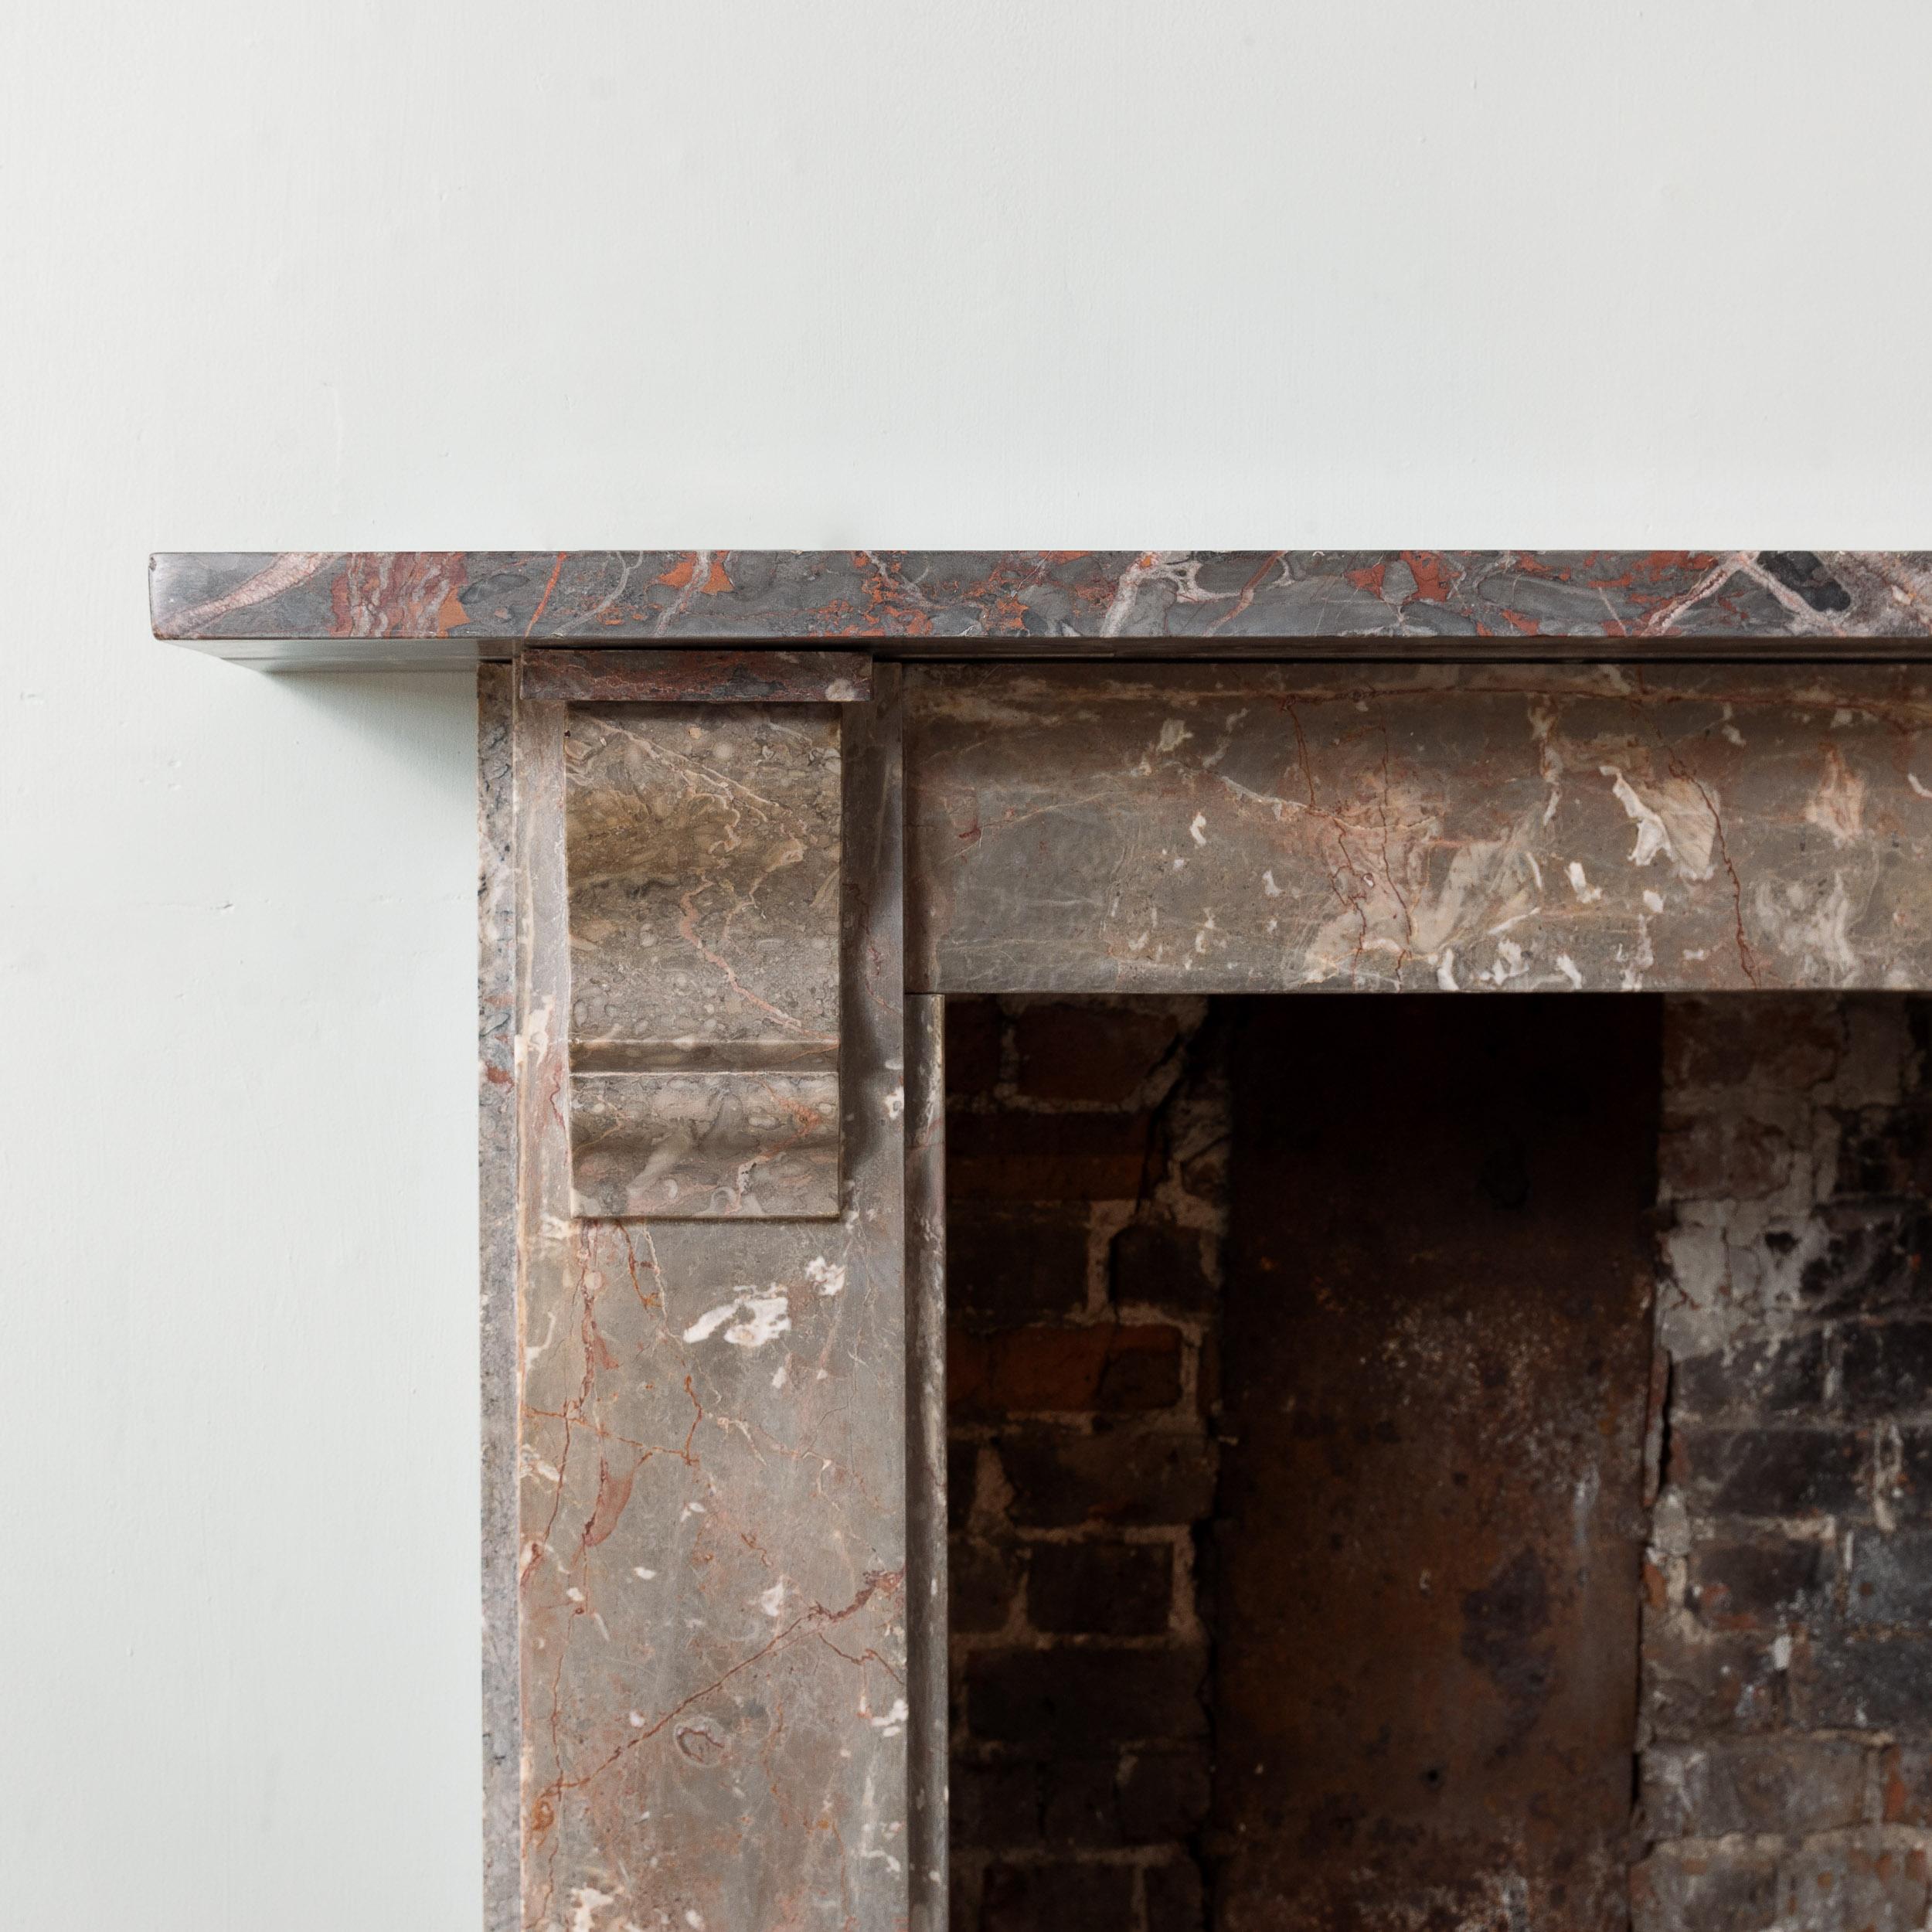 A Nineteenth century Devonian limestone chimneypiece, mid-Victorian, with plain corbels to the jambs, the shelf original but of a slightly darker grade of stone.

Dimensions:	110.5cm (43½